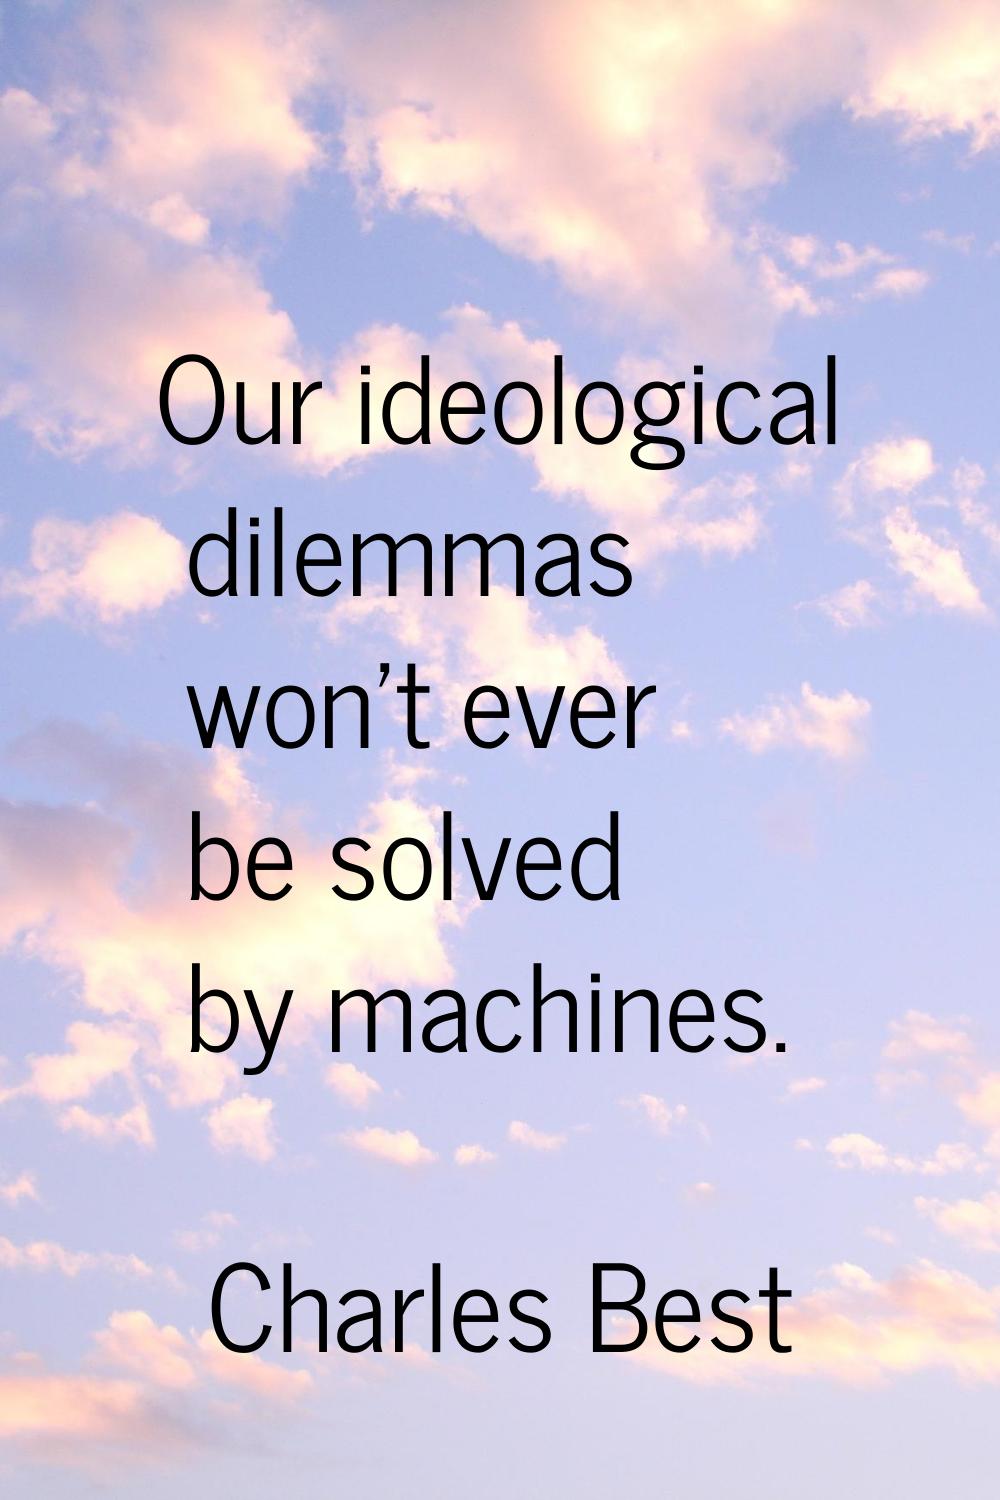 Our ideological dilemmas won't ever be solved by machines.